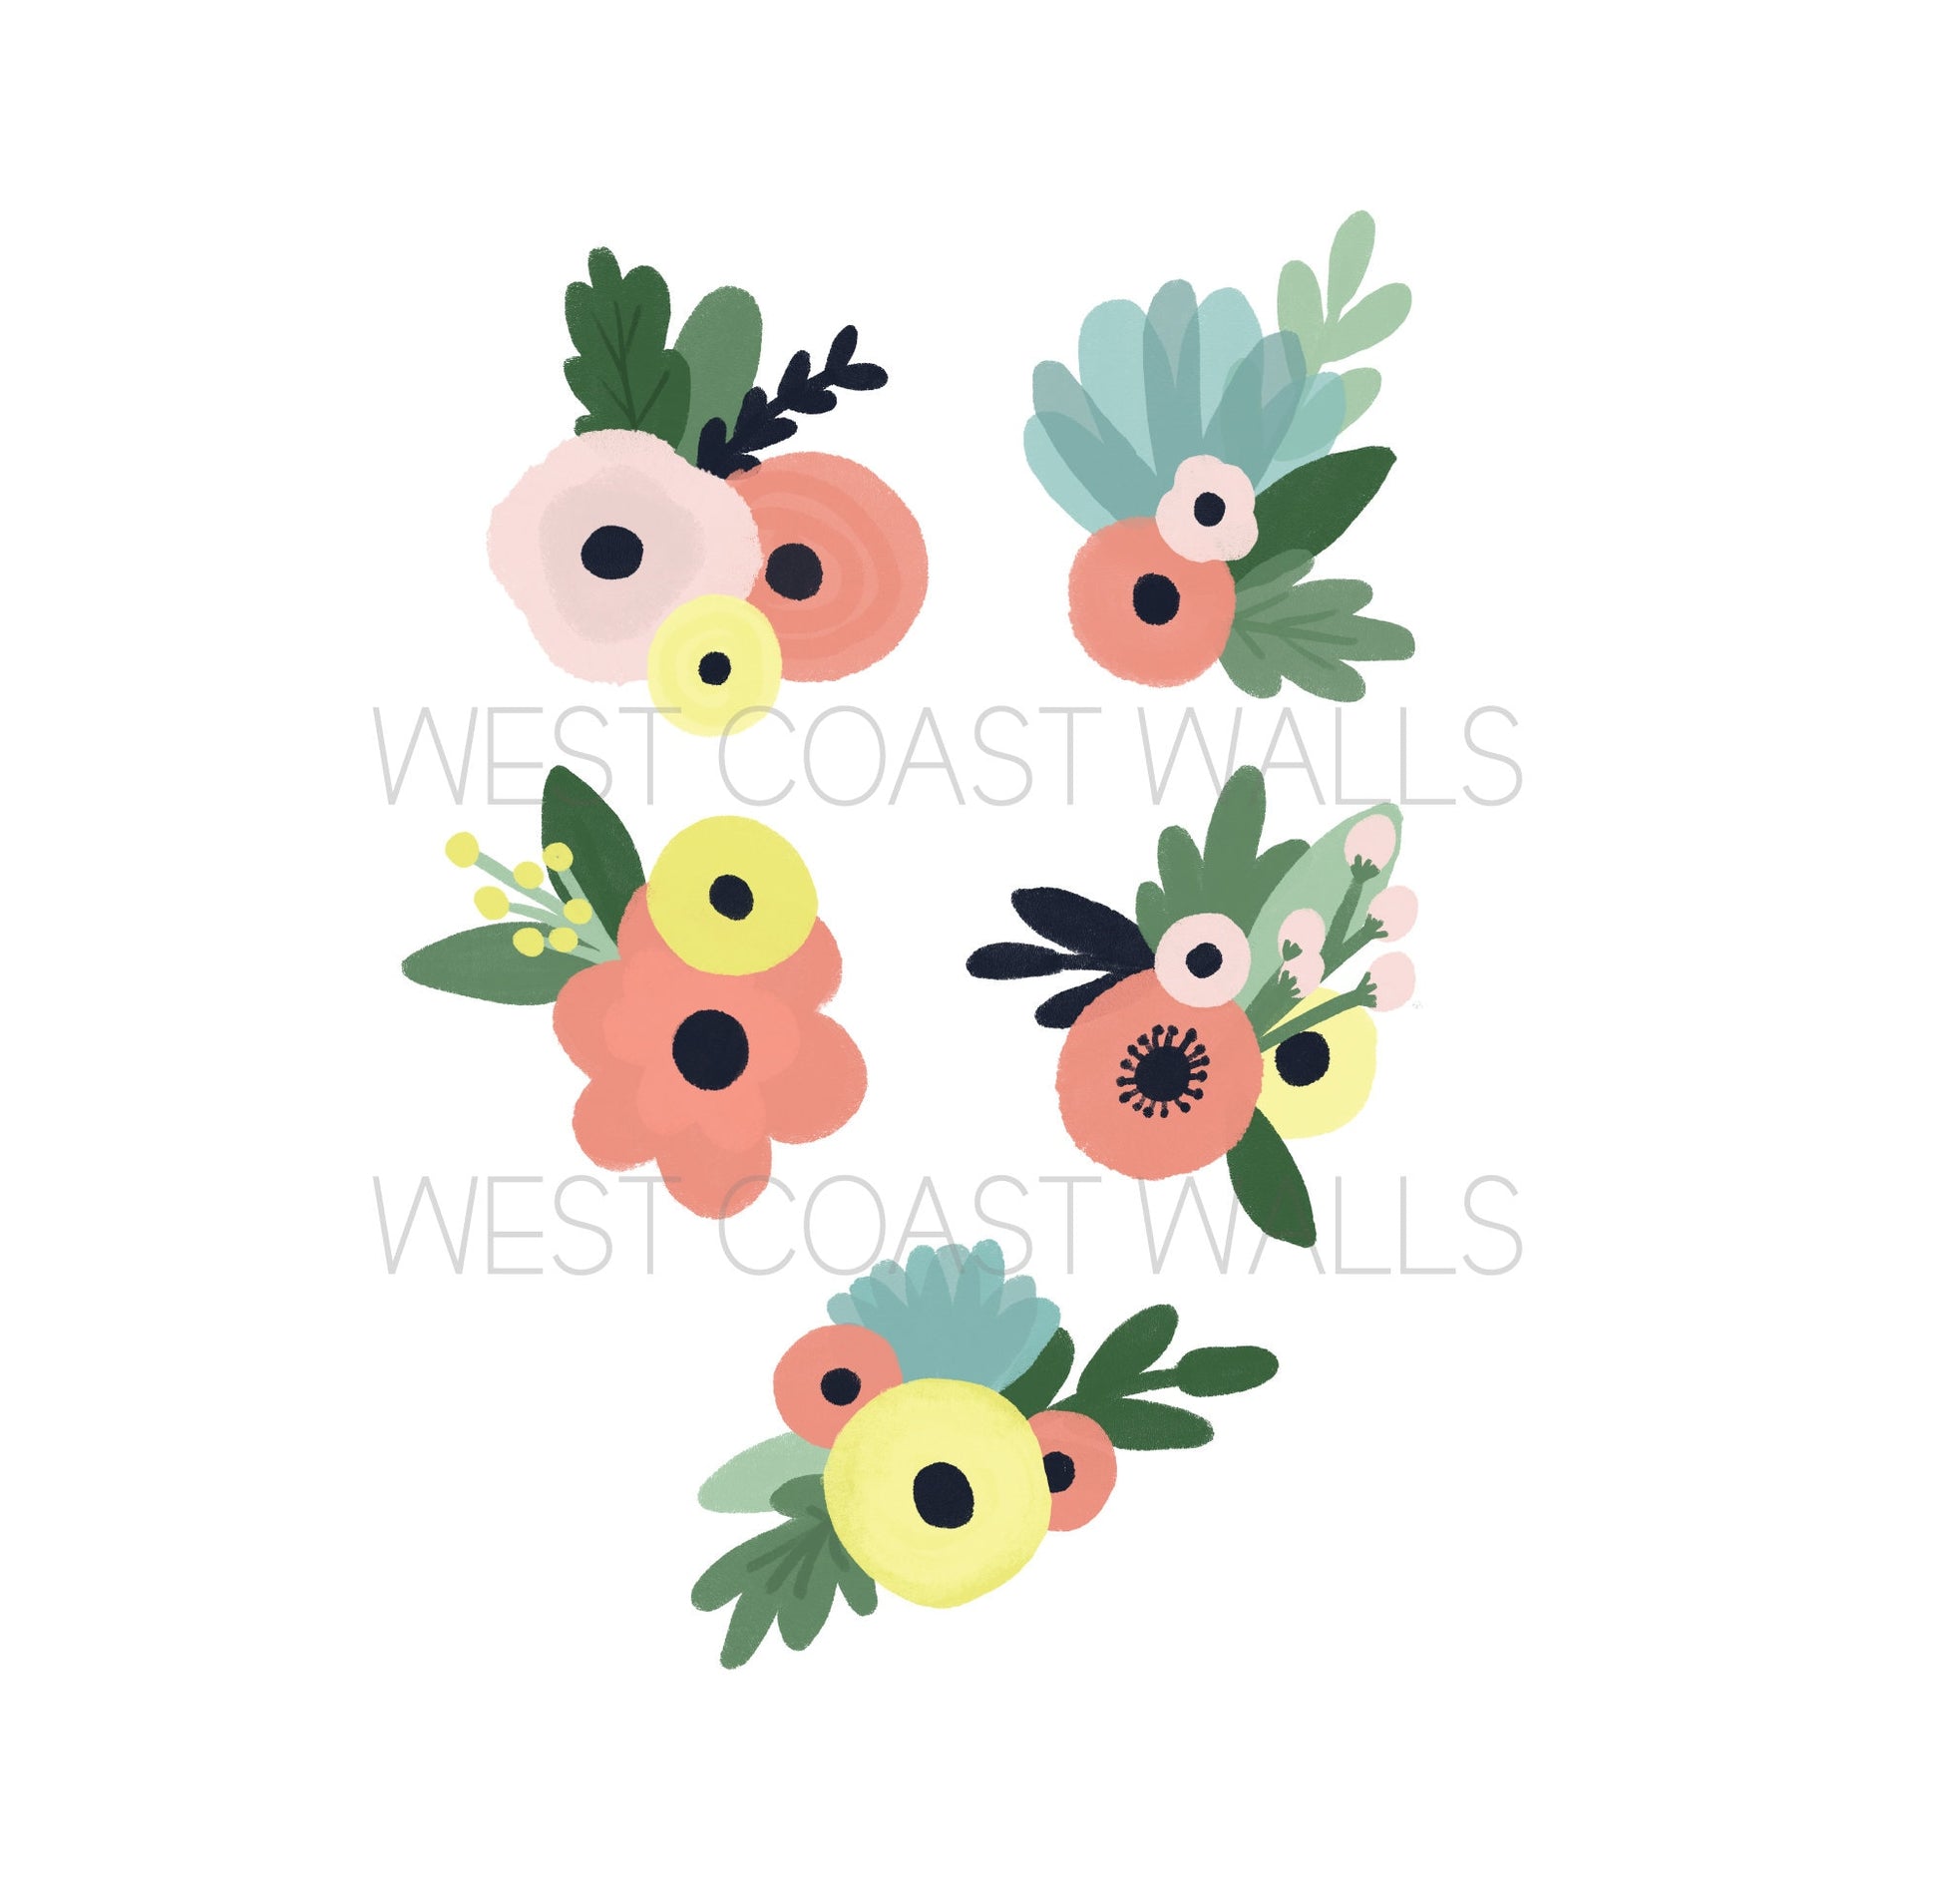 Painted Flowers Removable Wall Decals